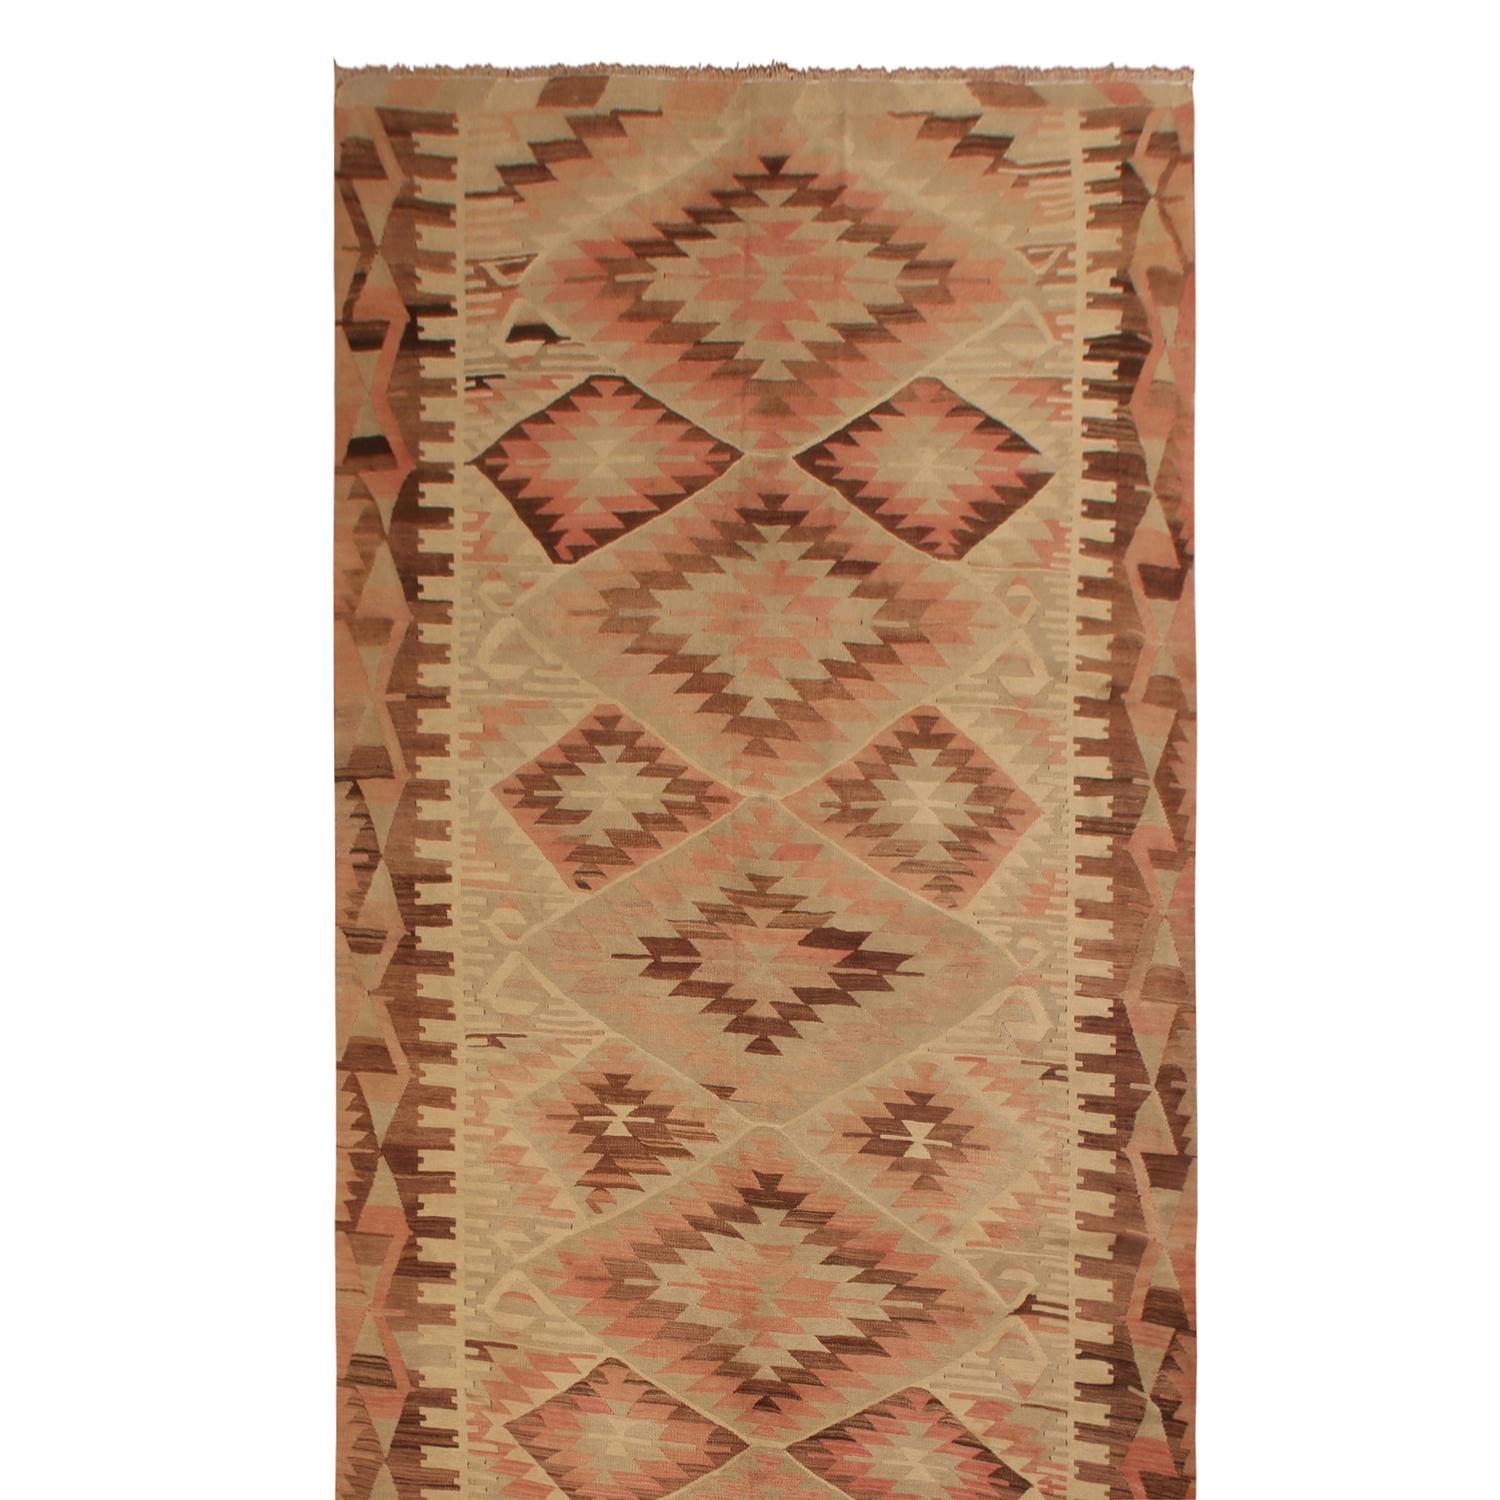 Originating from Turkey between 1940-1950, this vintage Kayseri wool Kilim rug enjoys an atypical background of rustic and lively colorways in rippling patterns, featuring a gracefully aged salmon pink colorway complementing its excellent condition.